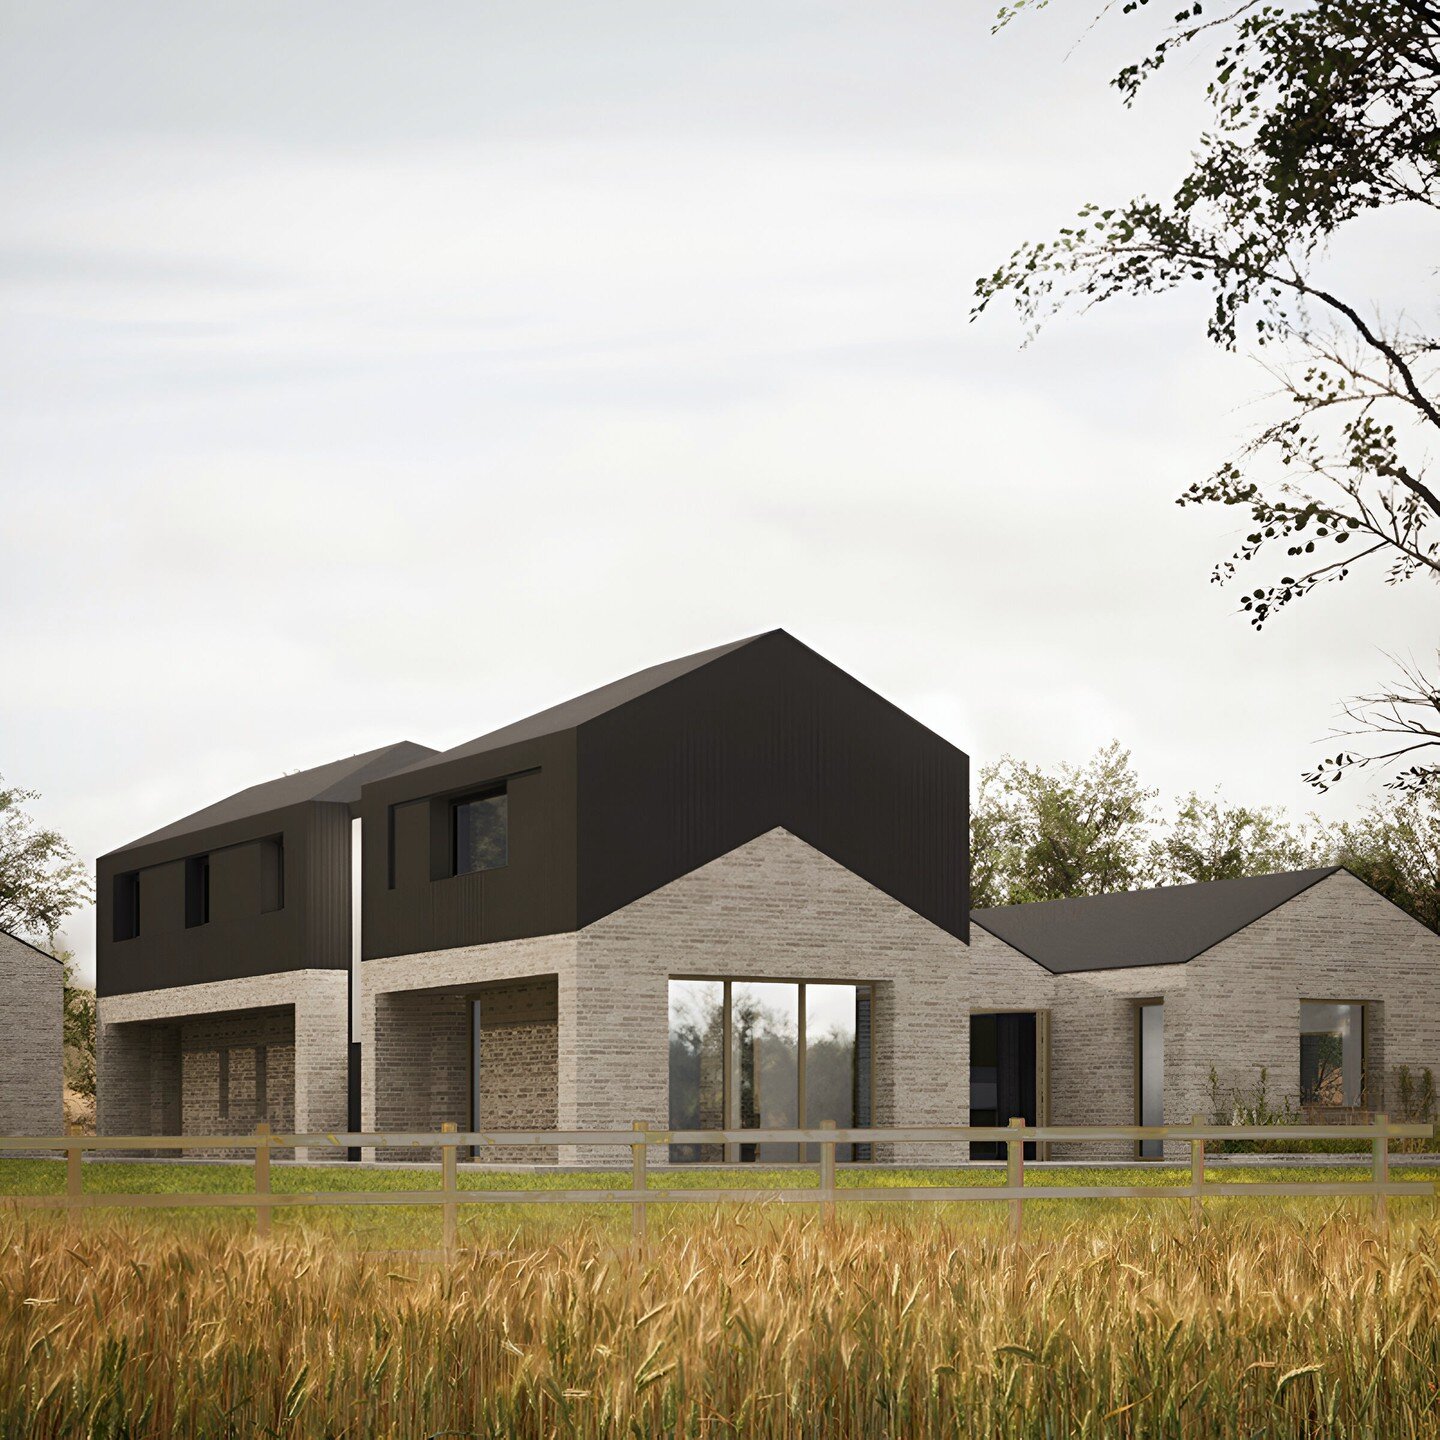 A new build passivhaus 5-bedroom family home that works with the landscape, context and new building technology on beautiful Cambridgeshire farmland.

#rockarchitects #passivhaus #cambridgearchitecture #archdrawing #archilovers #passivehouse #cambrid